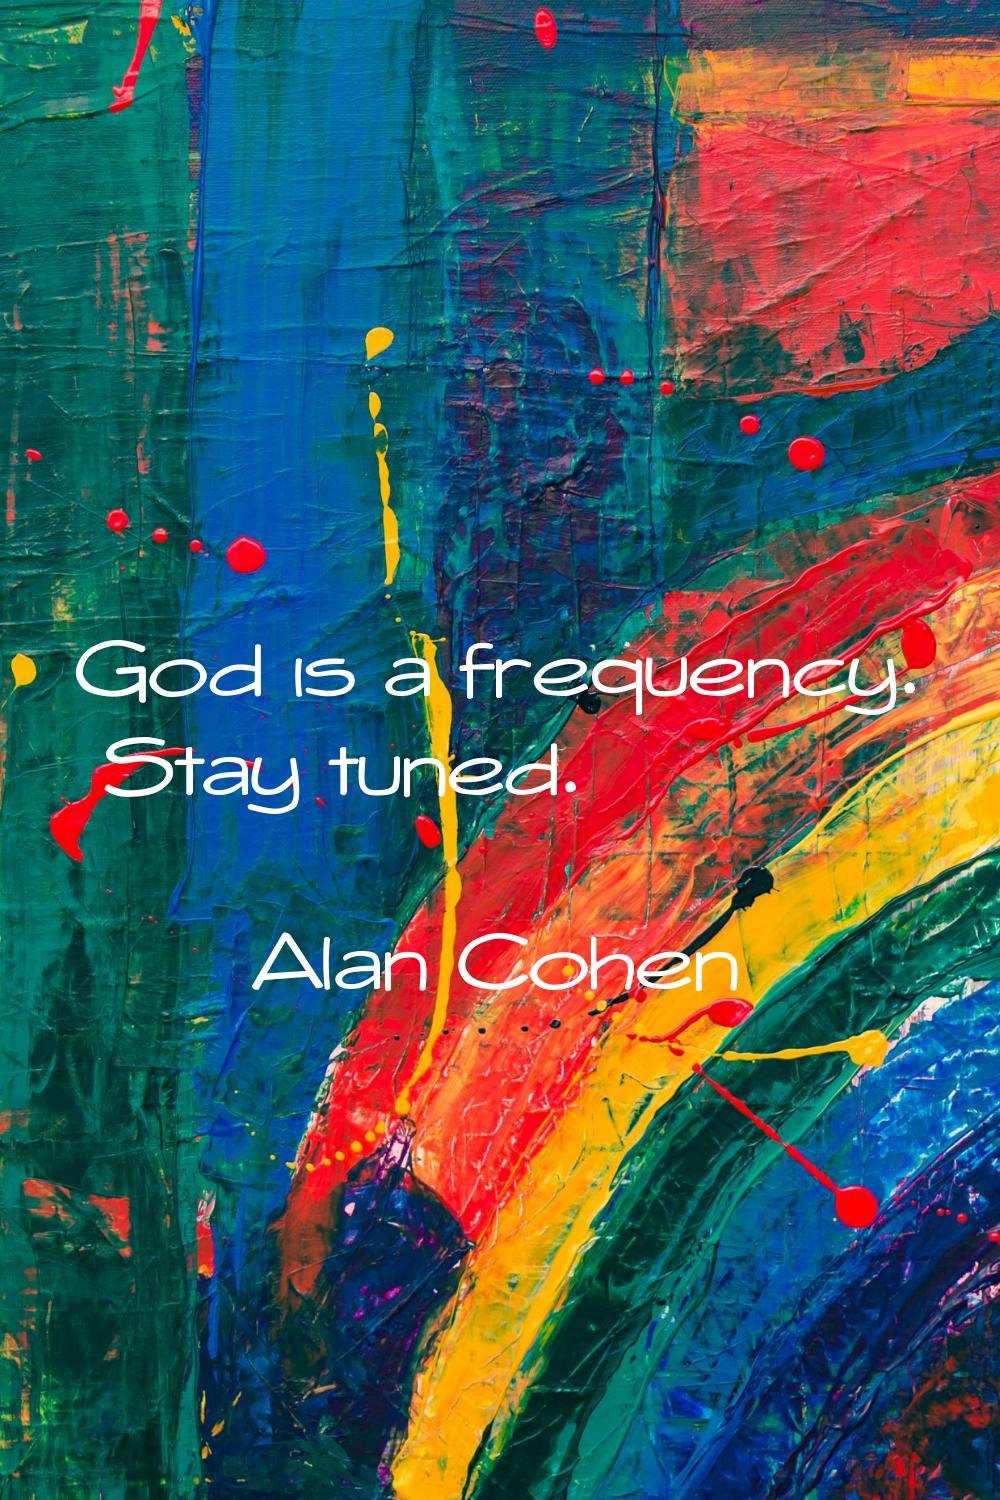 God is a frequency. Stay tuned.